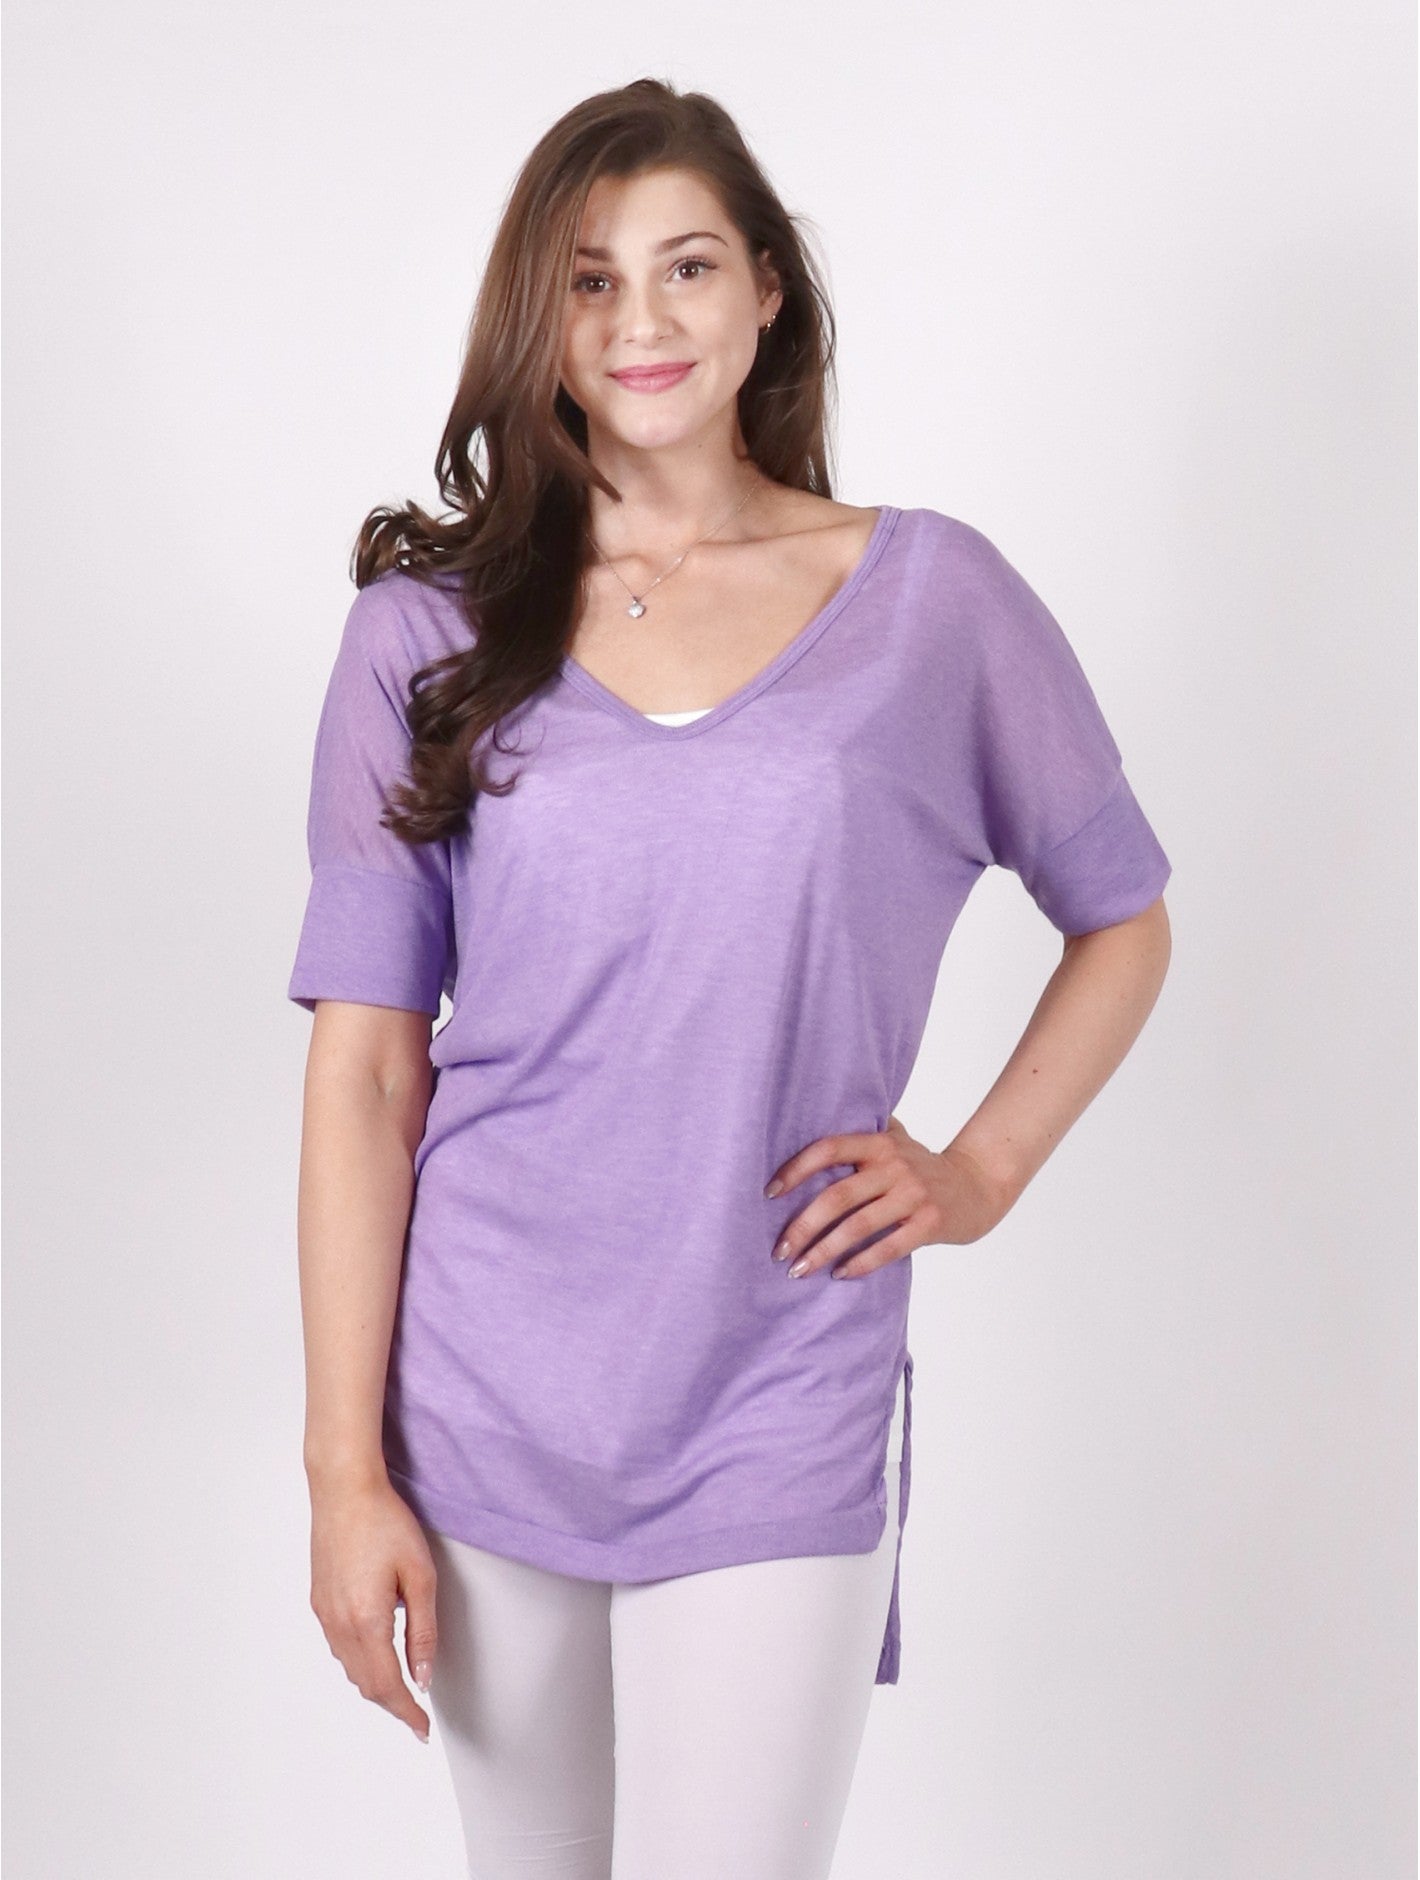 Purple v neck 1/2 sleeve top.  The back of the top is longer than the